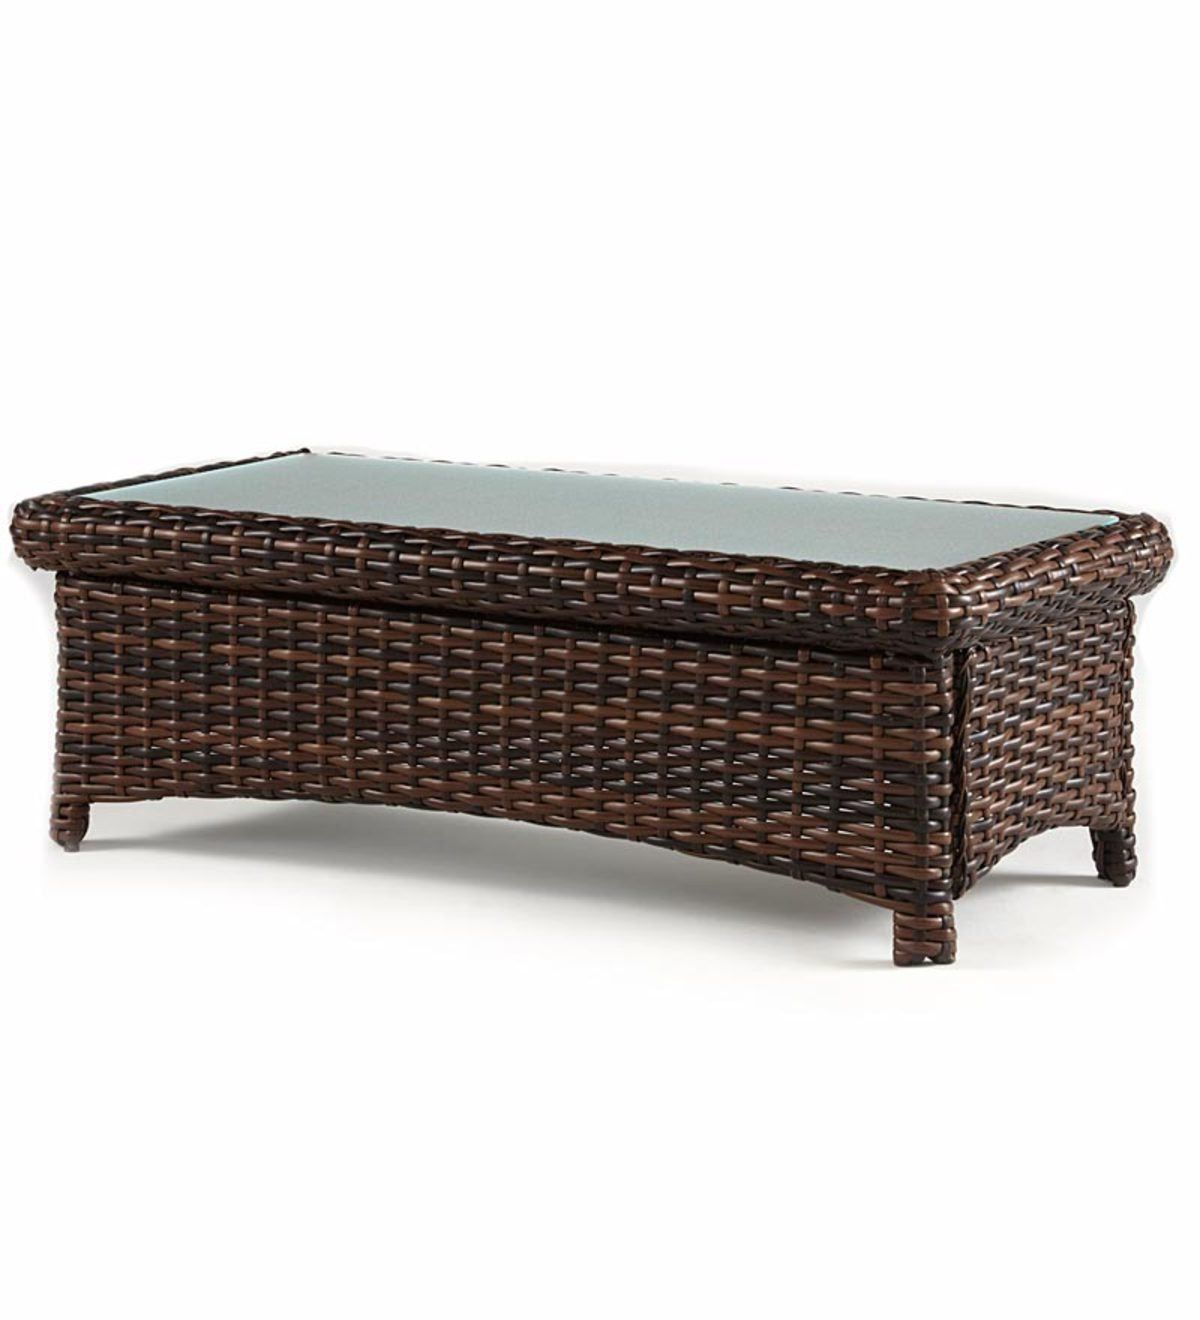 Plowhearth Throughout Wicker Coffee Tables (View 6 of 10)